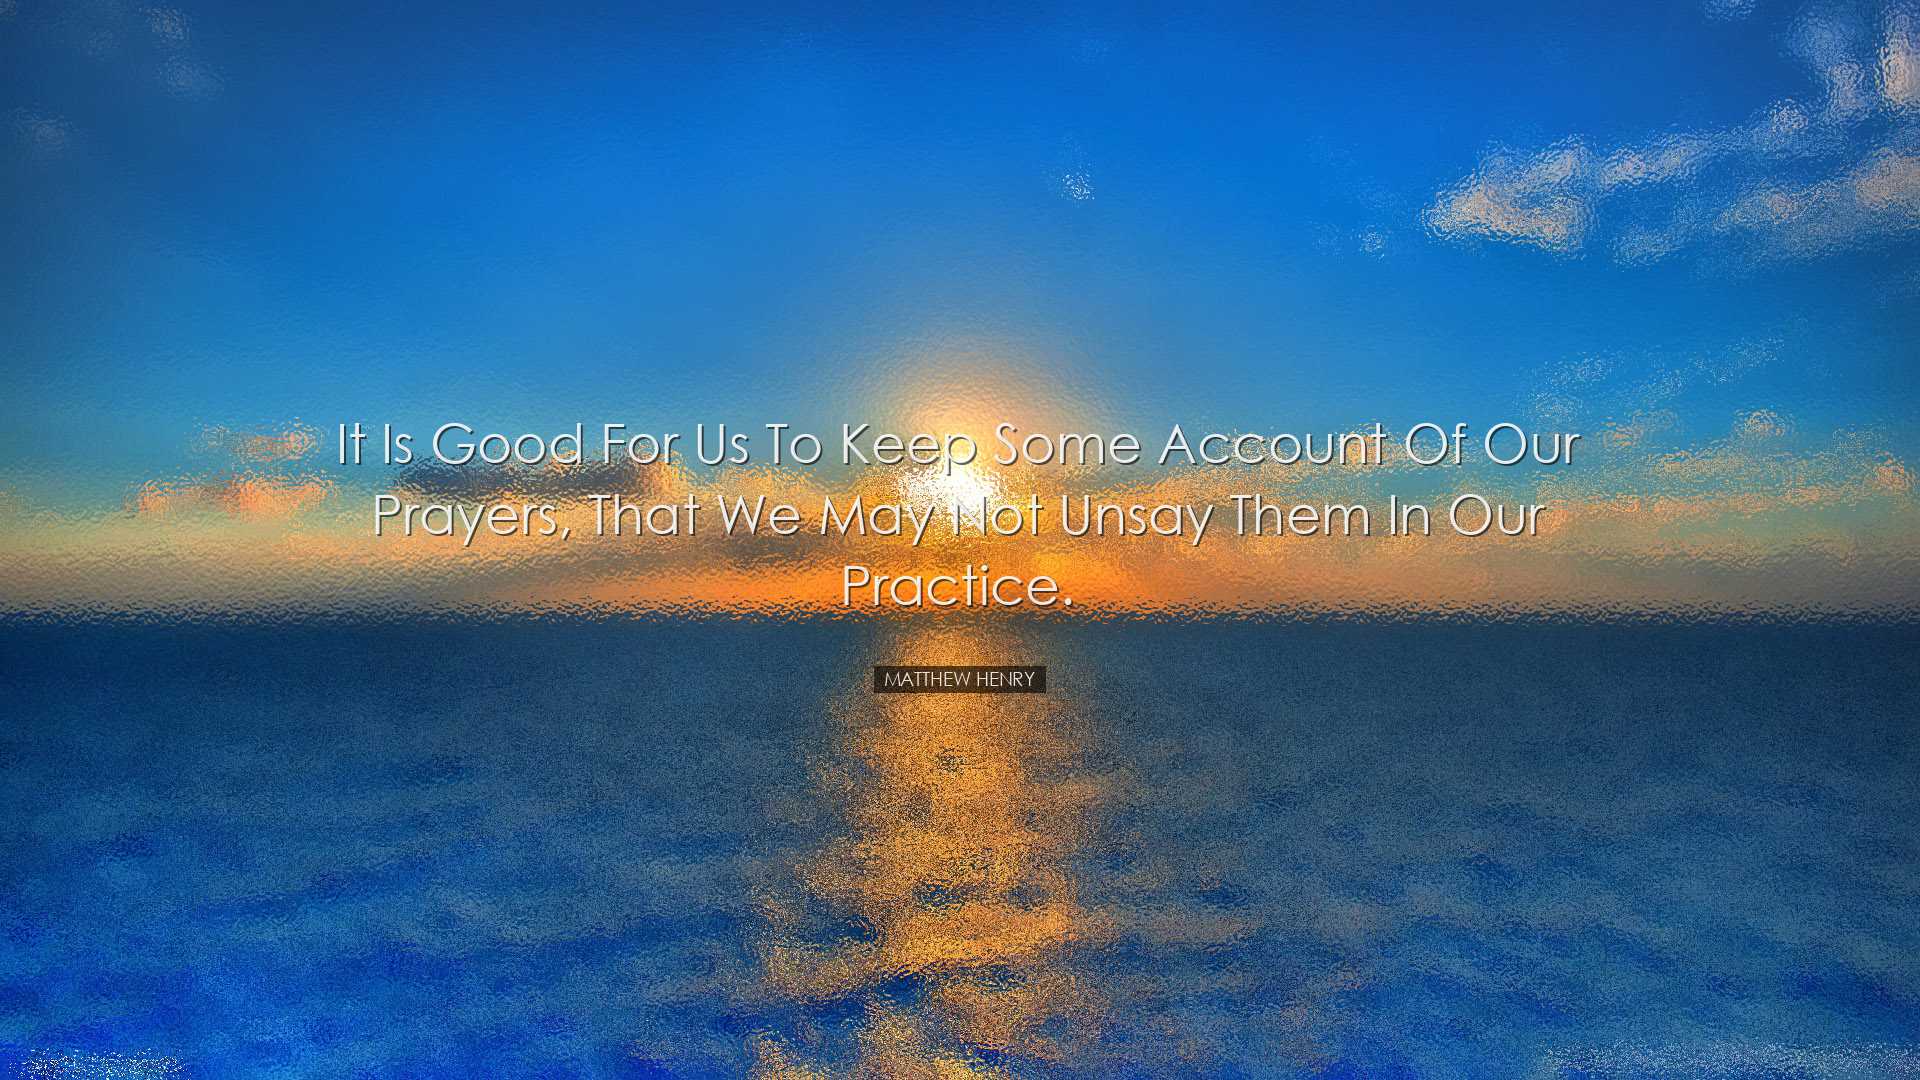 It is good for us to keep some account of our prayers, that we may